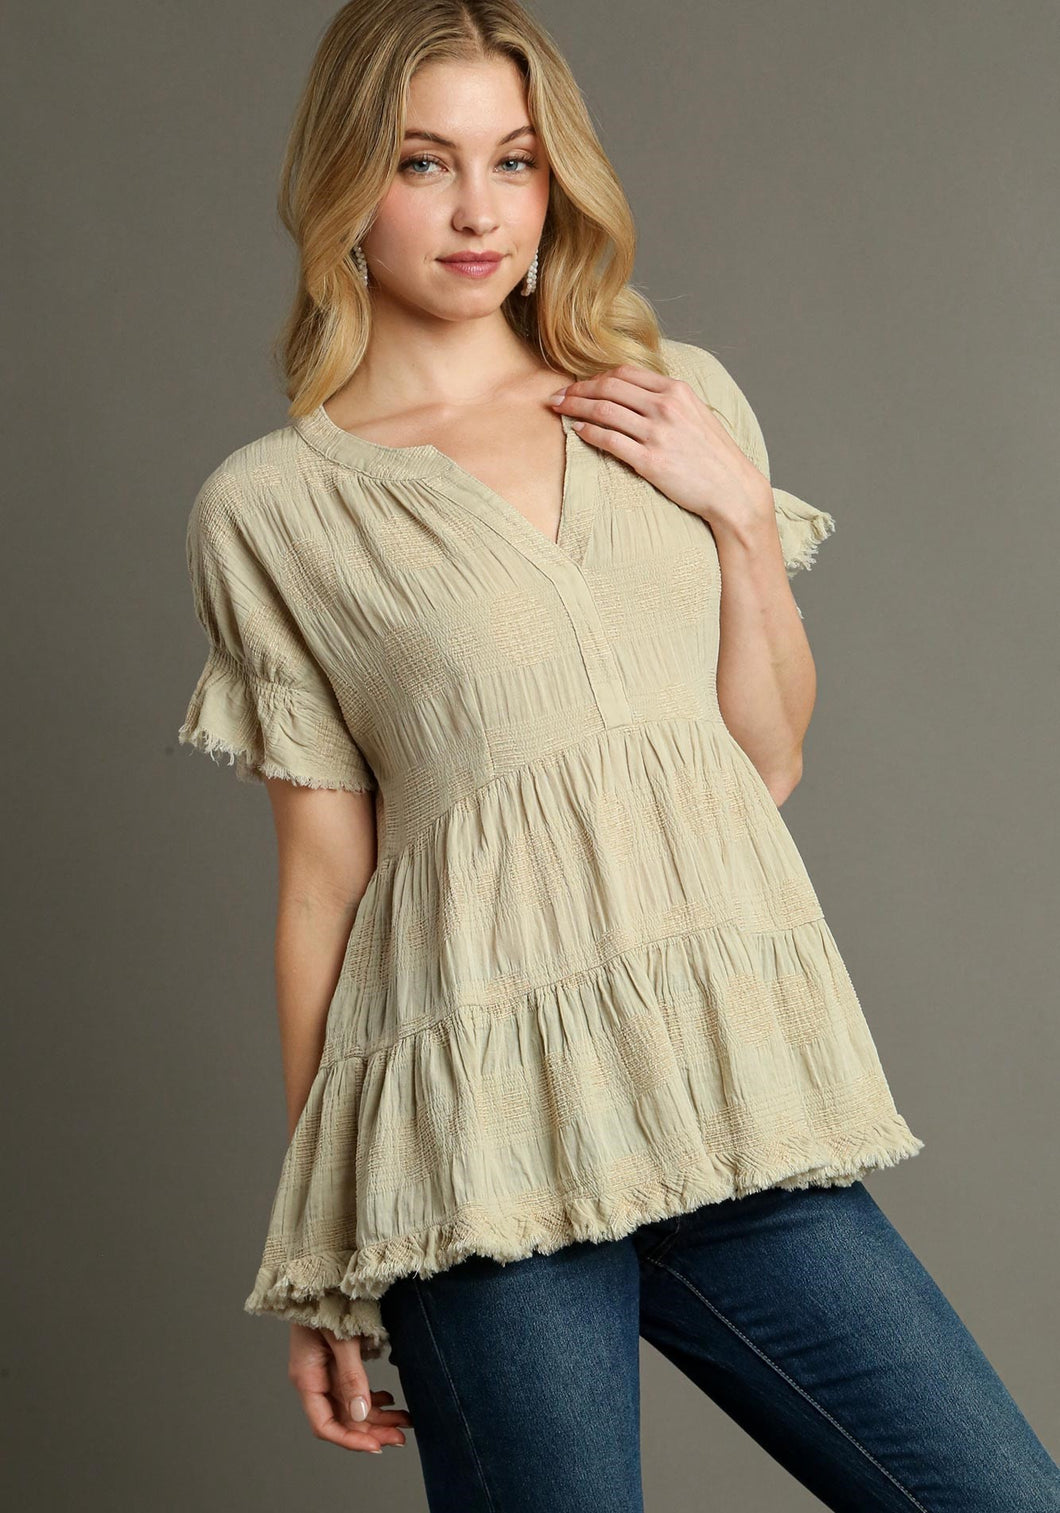 Umgee Baby Doll Top with Textured Swiss Dot Jacquard Print in Oatmeal Shirts & Tops Umgee   